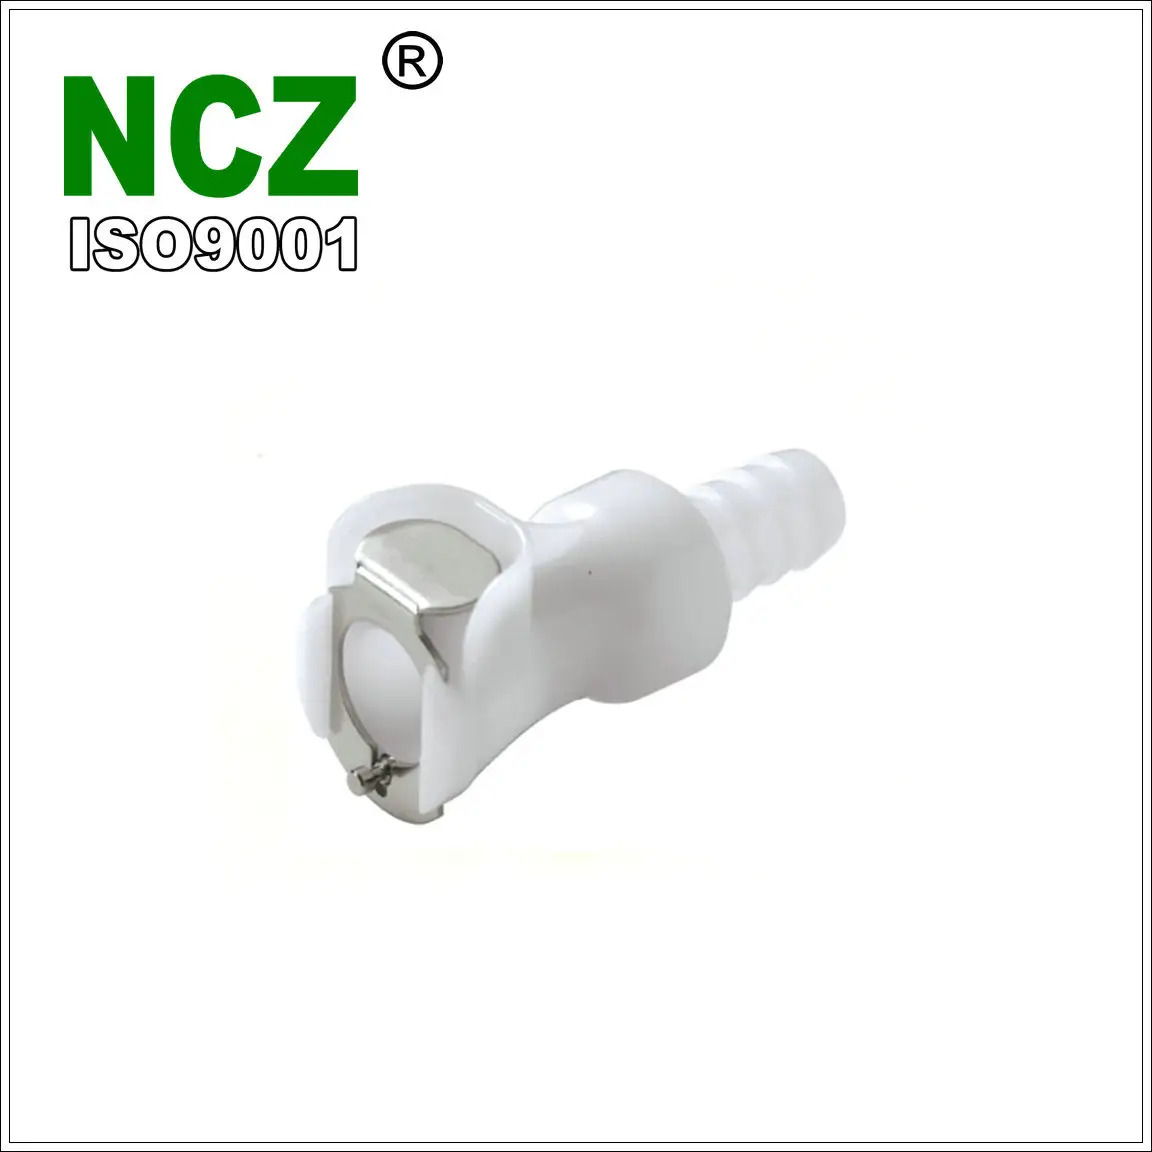 NCZ 1/4" flow RS-PLC Series cpc fittings IN-LINE HOSE BARB plcd 17004 17005 17006 Fluid coupling Quick connector medical pom